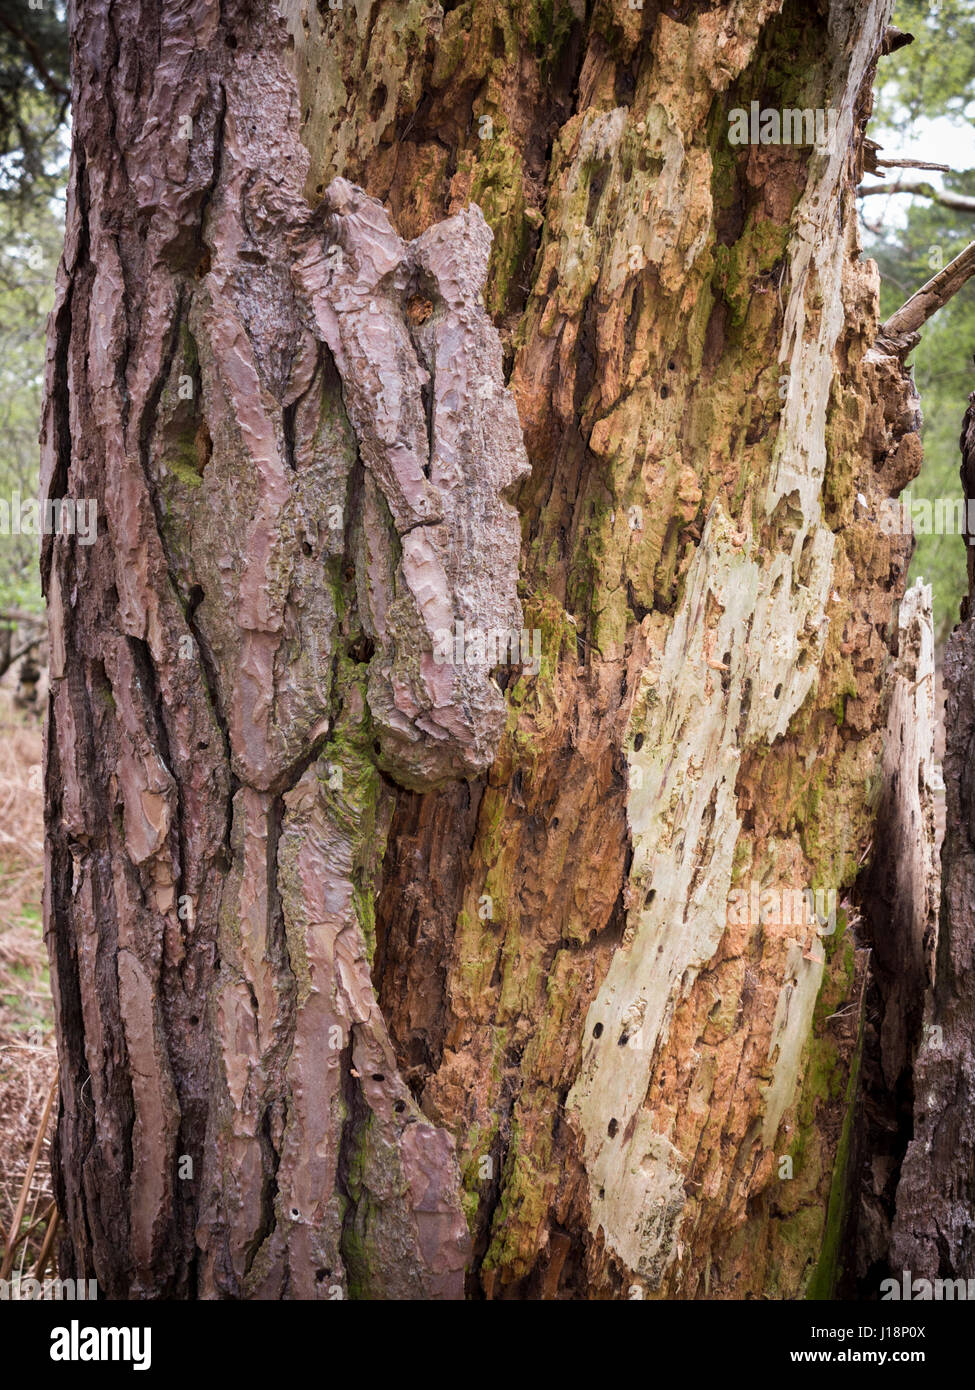 Detail of decaying tree bark with infestations and rot Stock Photo